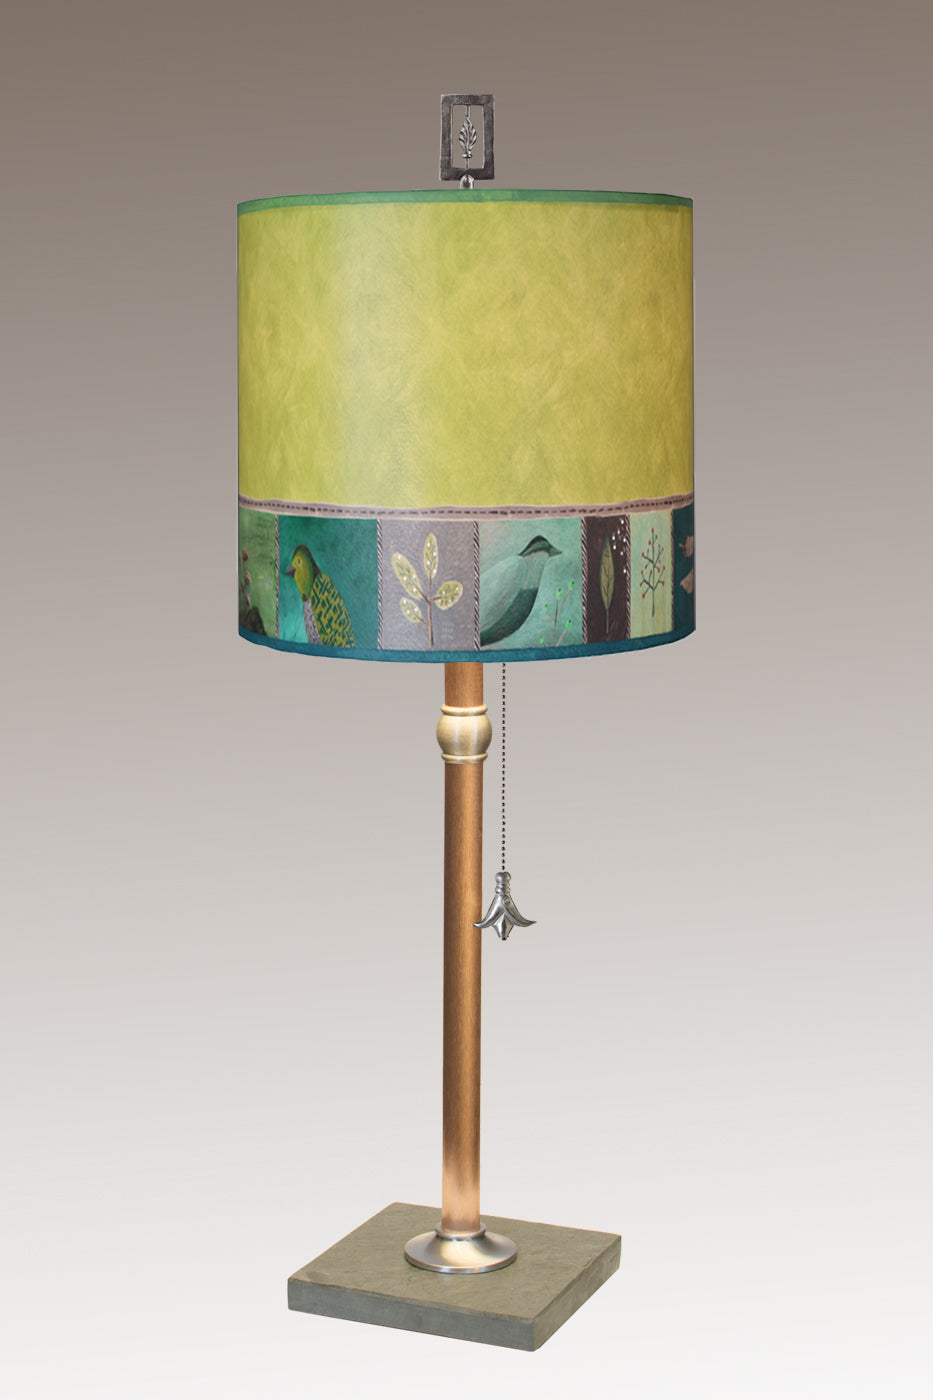 Janna Ugone & Co Table Lamps Copper Table Lamp with Medium Drum Shade in Woodland Trails in Leaf